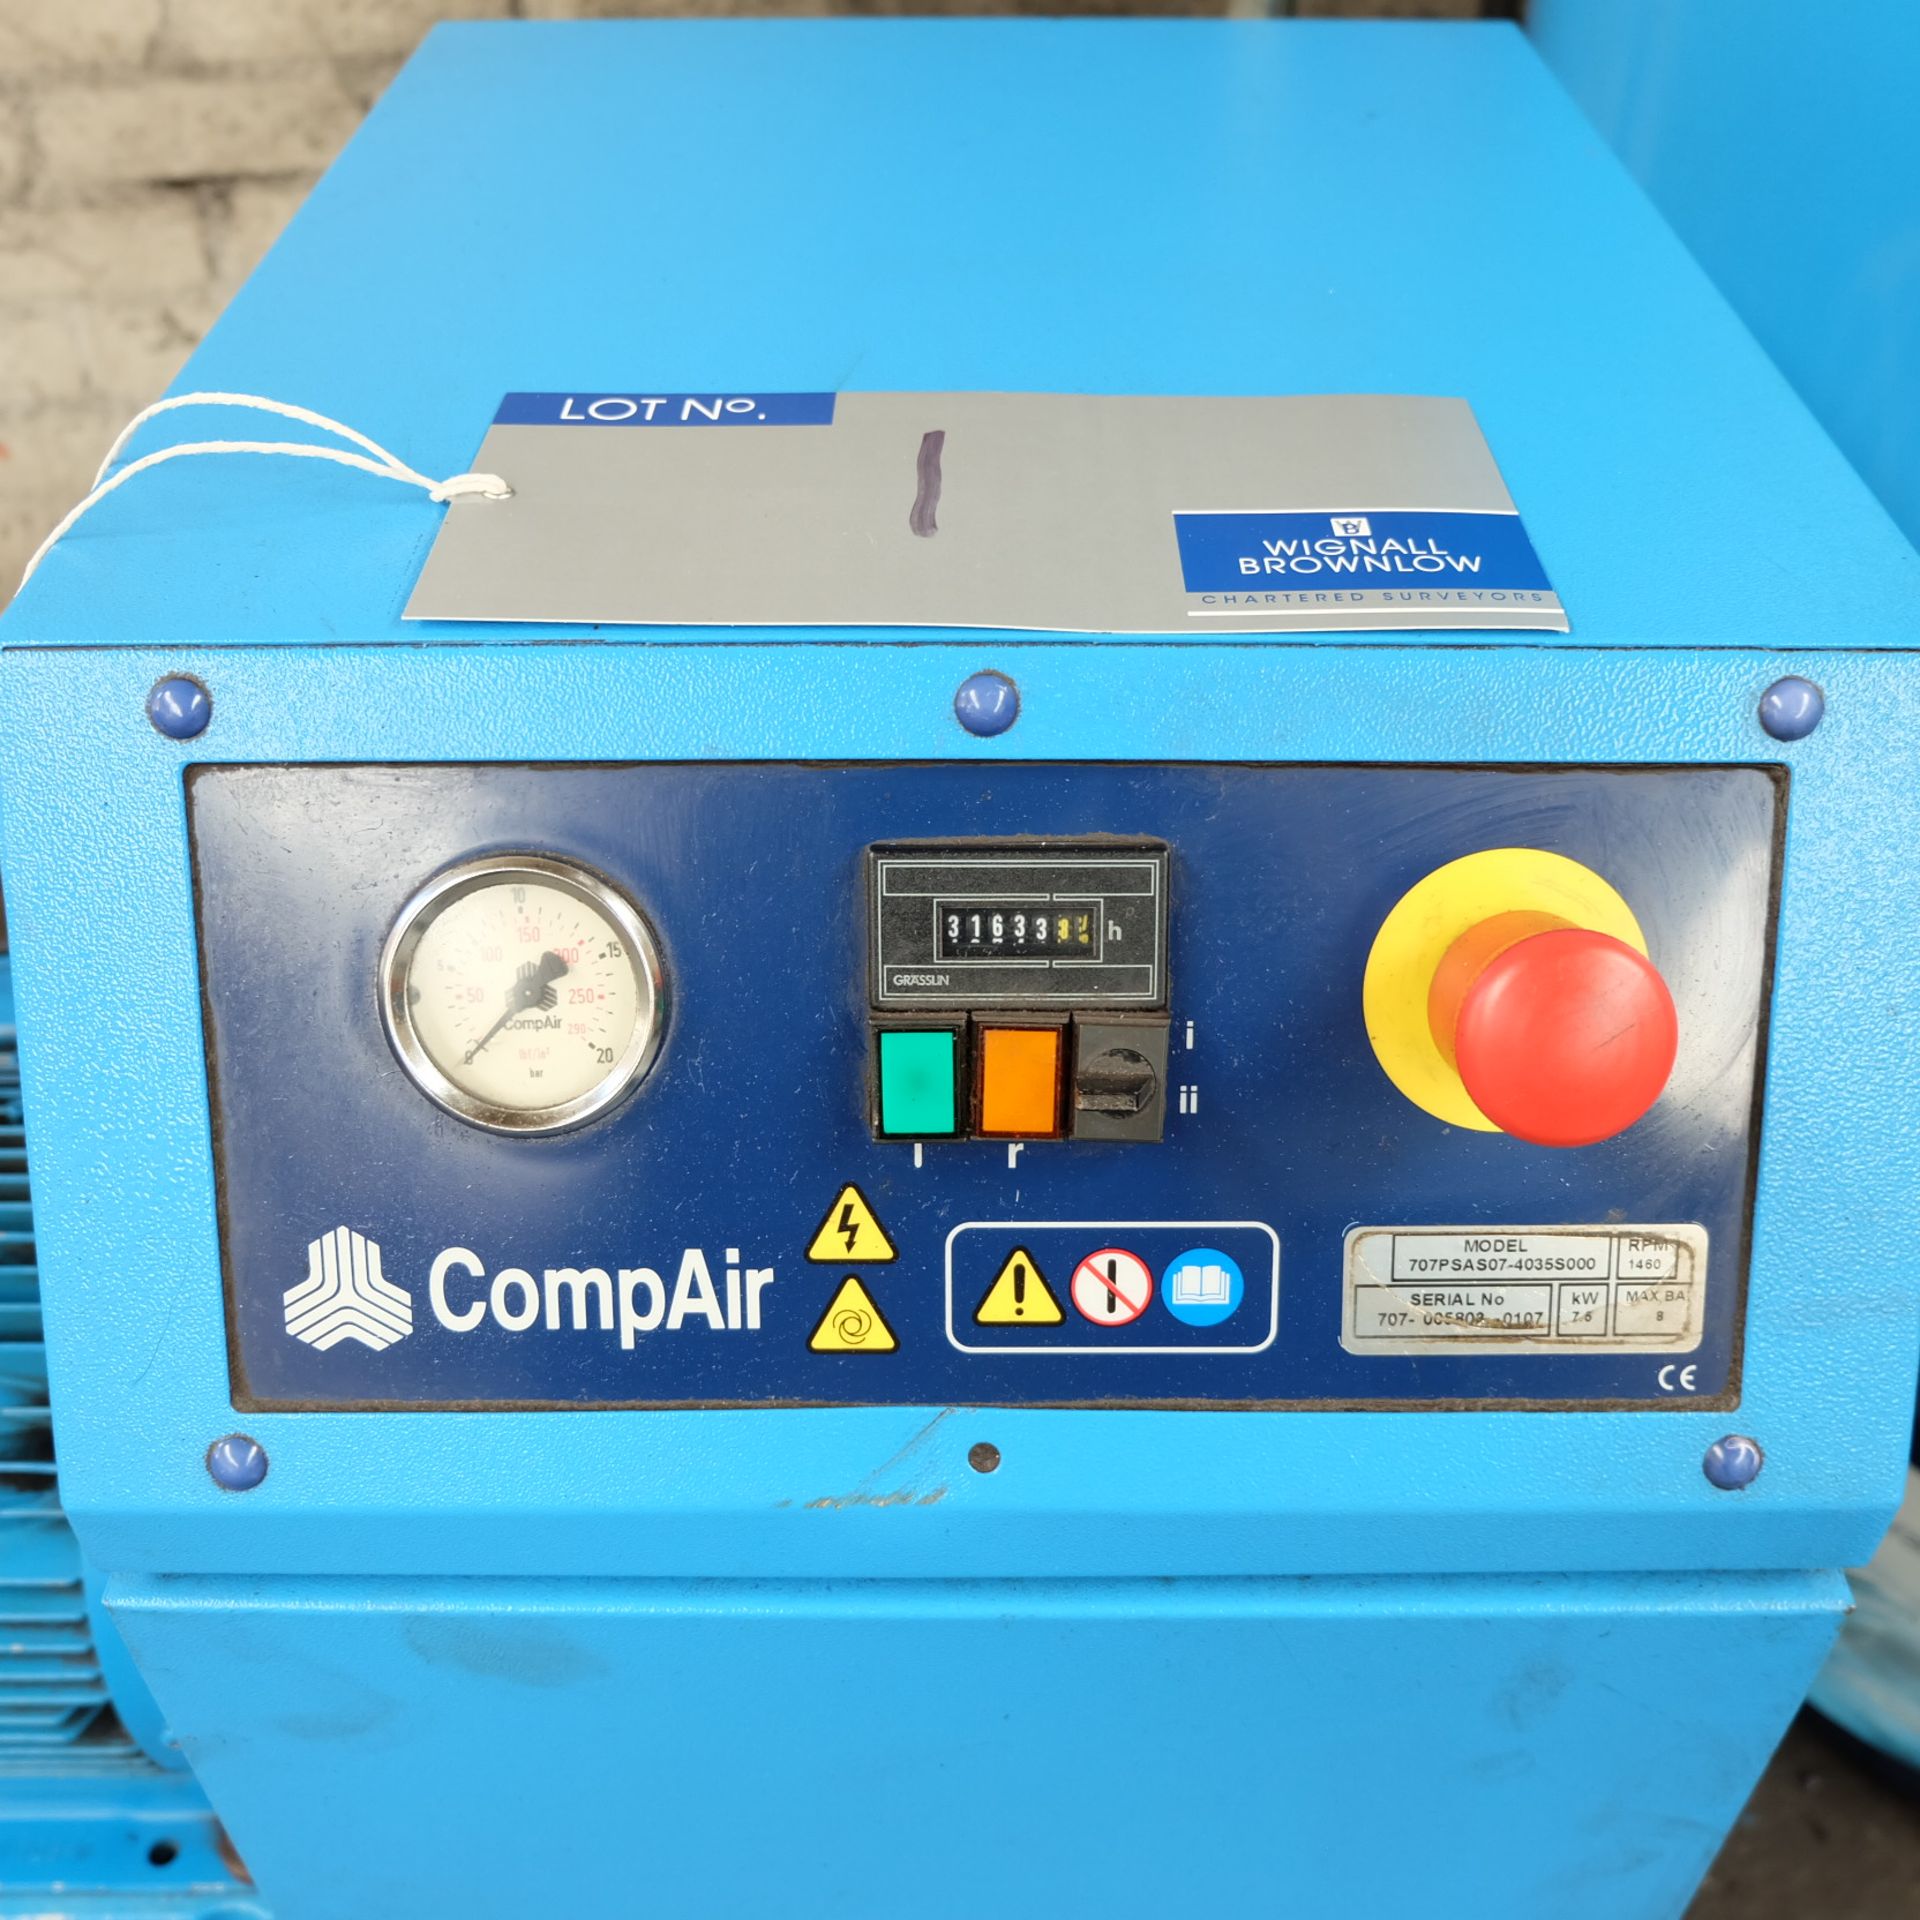 A CompAir V07 Model 707PSAS07-4035S000 Rotary Air Compressor No.707-005803-0107, 1460rpm, 7.5kW with - Image 2 of 5